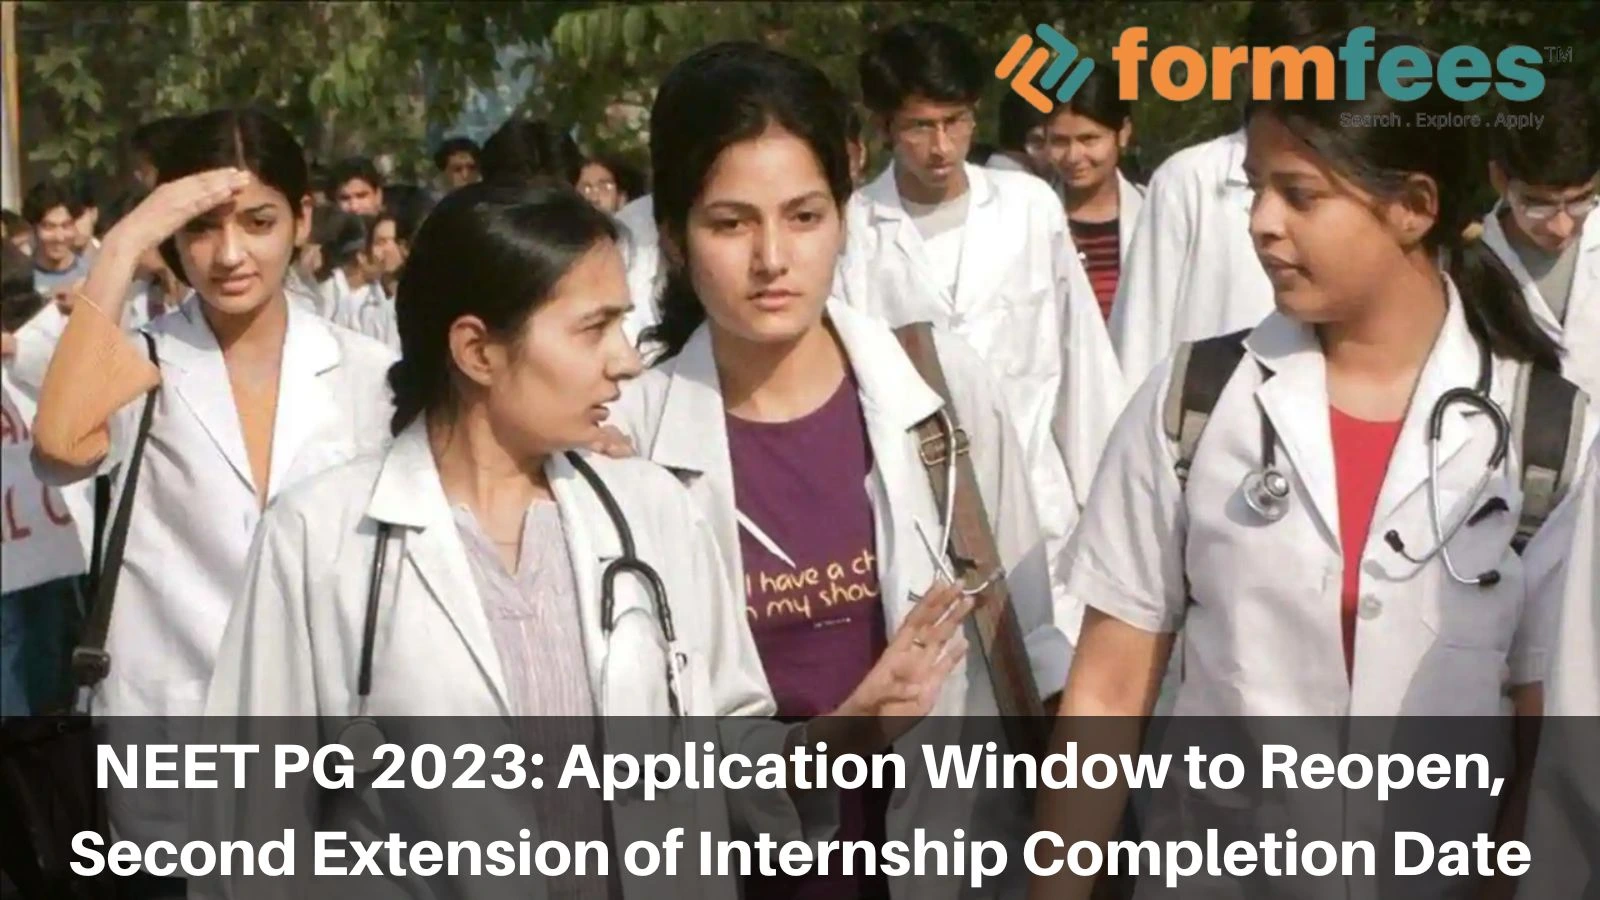 NEET PG 2023: Application Window to Reopen, Second Extension of Internship Completion Date